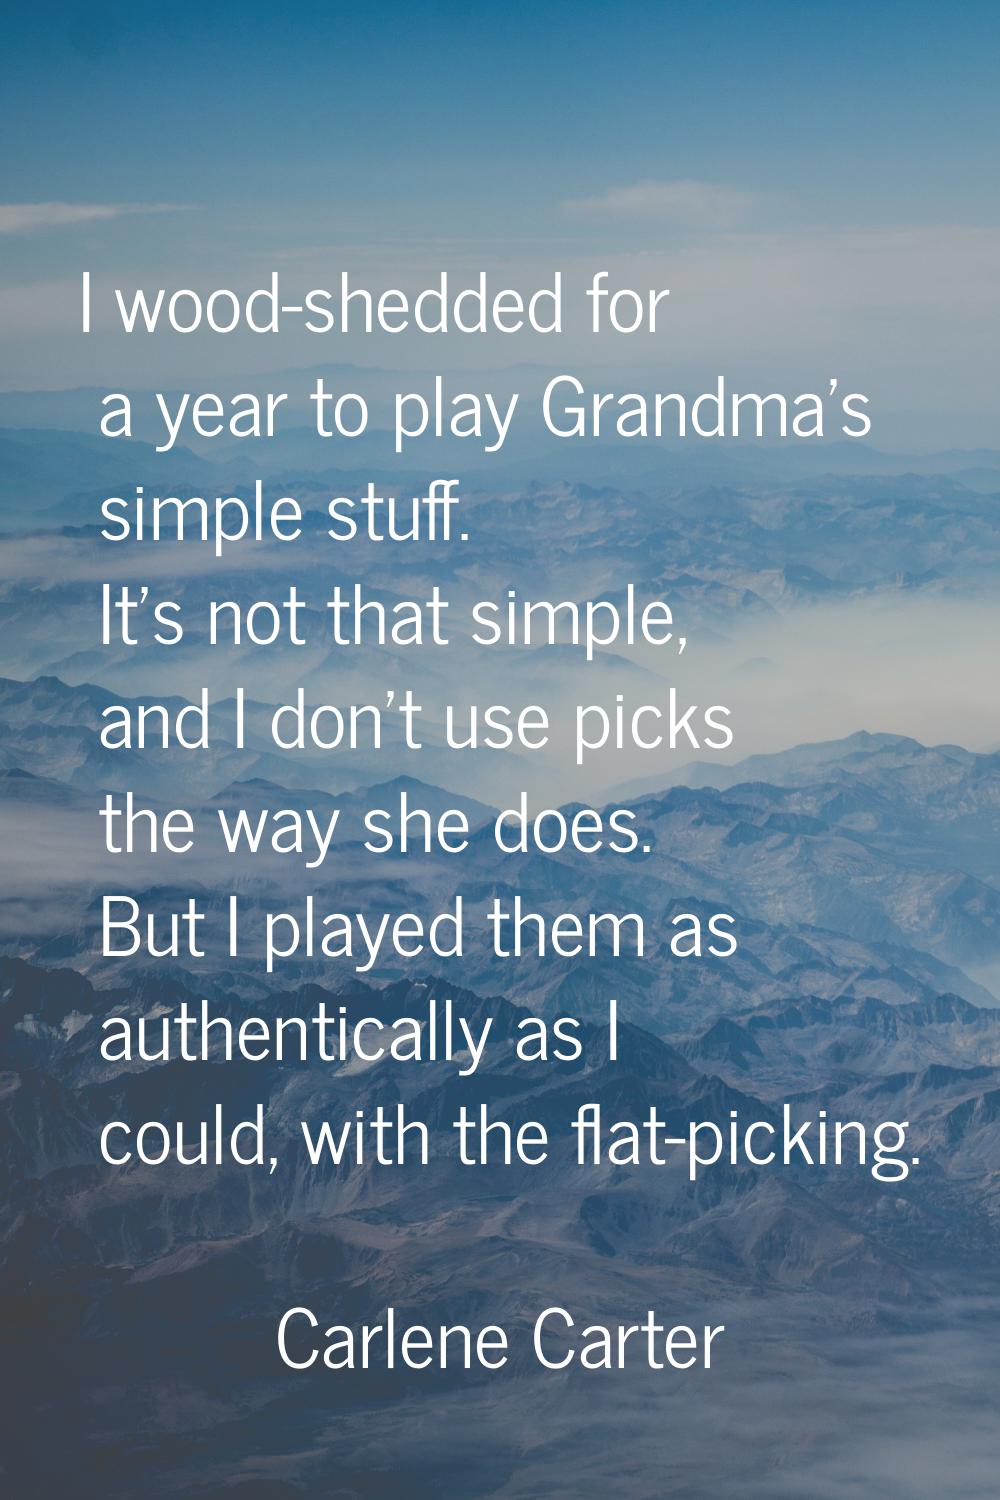 I wood-shedded for a year to play Grandma's simple stuff. It's not that simple, and I don't use pic